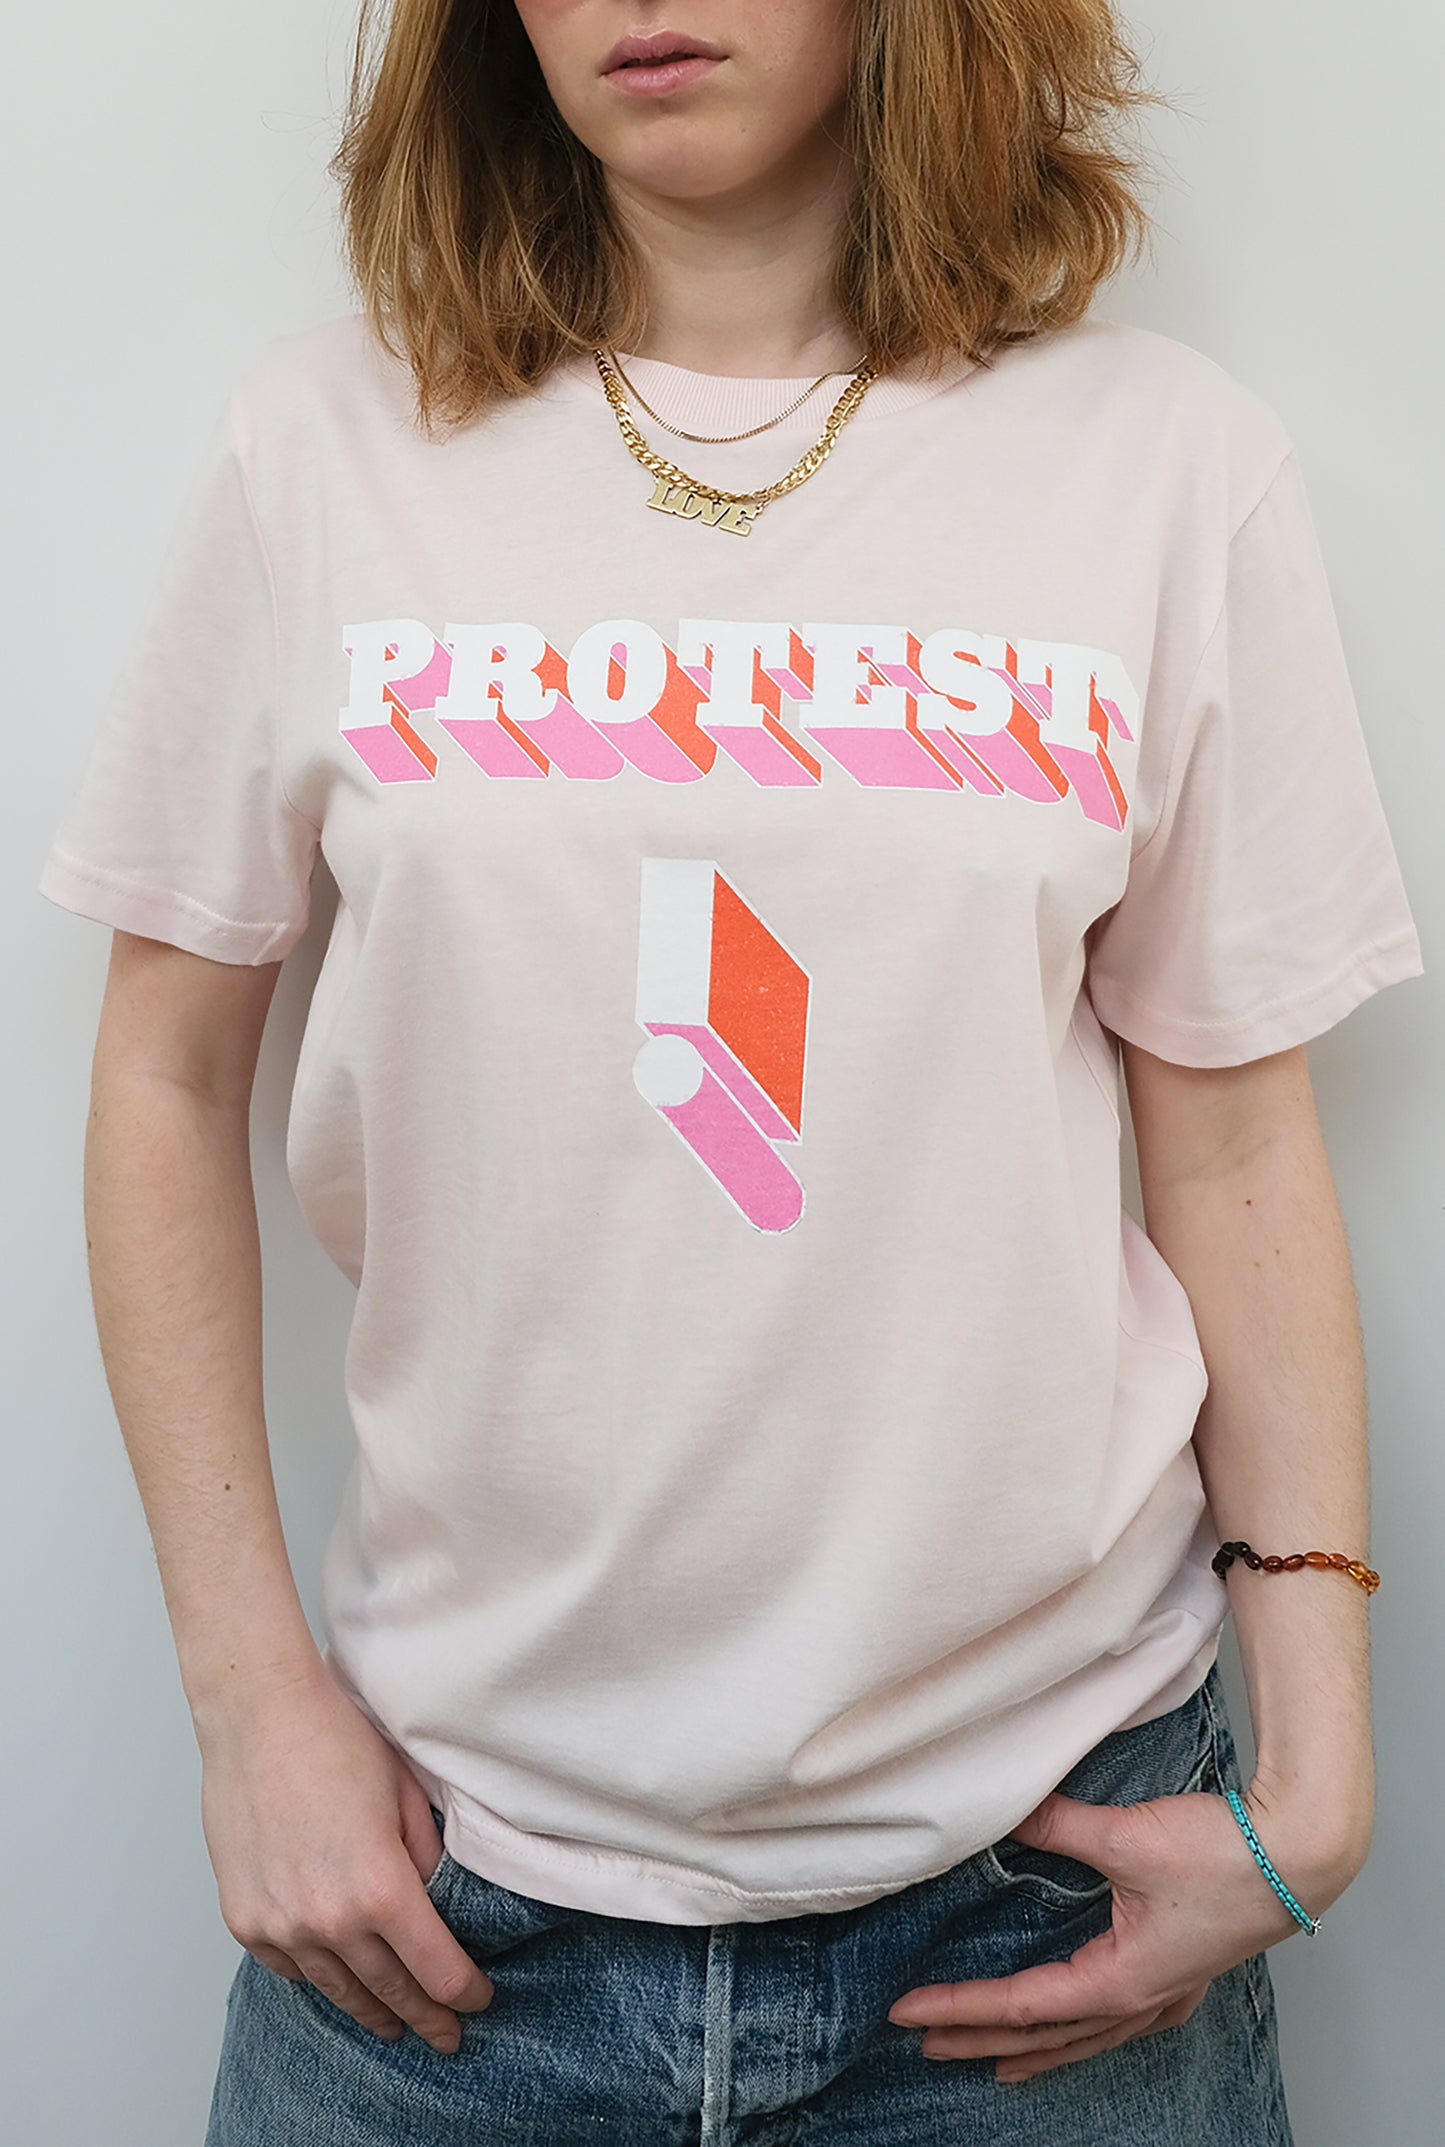 PROTEST! PINK - UNISEX